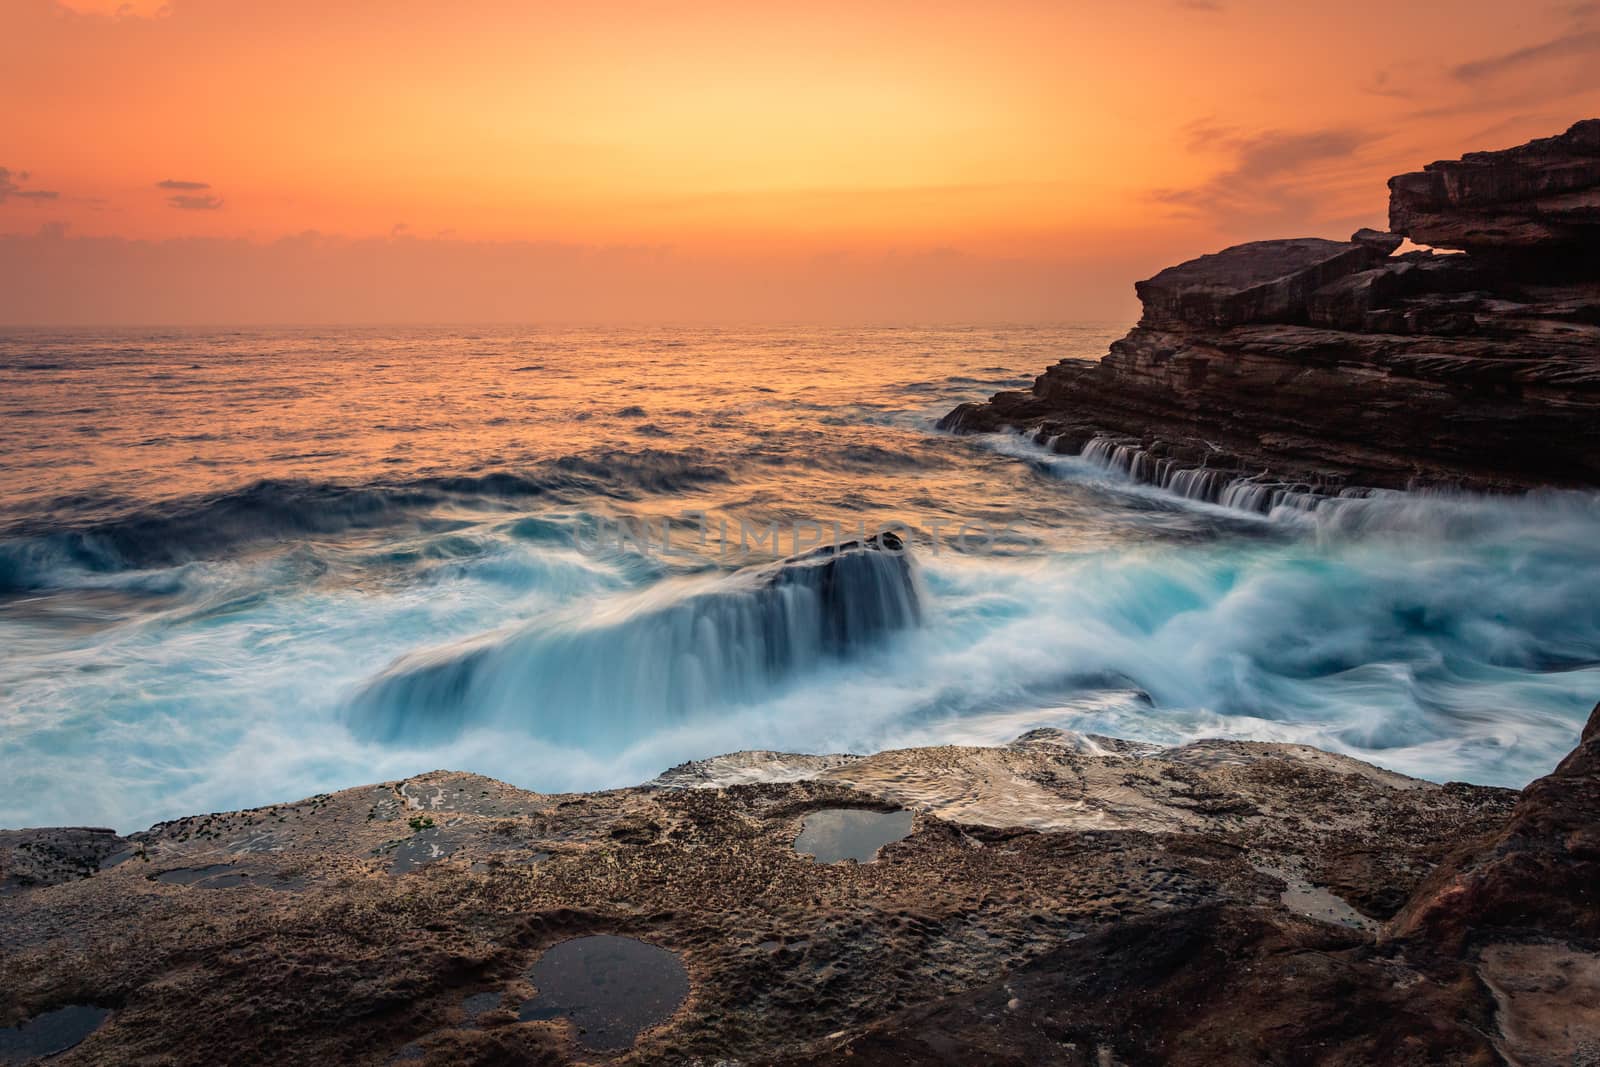 Stunning sunrise on the Sydney sea coast and beautiful motion flows across shipwreck rock as waves crash and tumble over it and onto the rock shelf and headland.